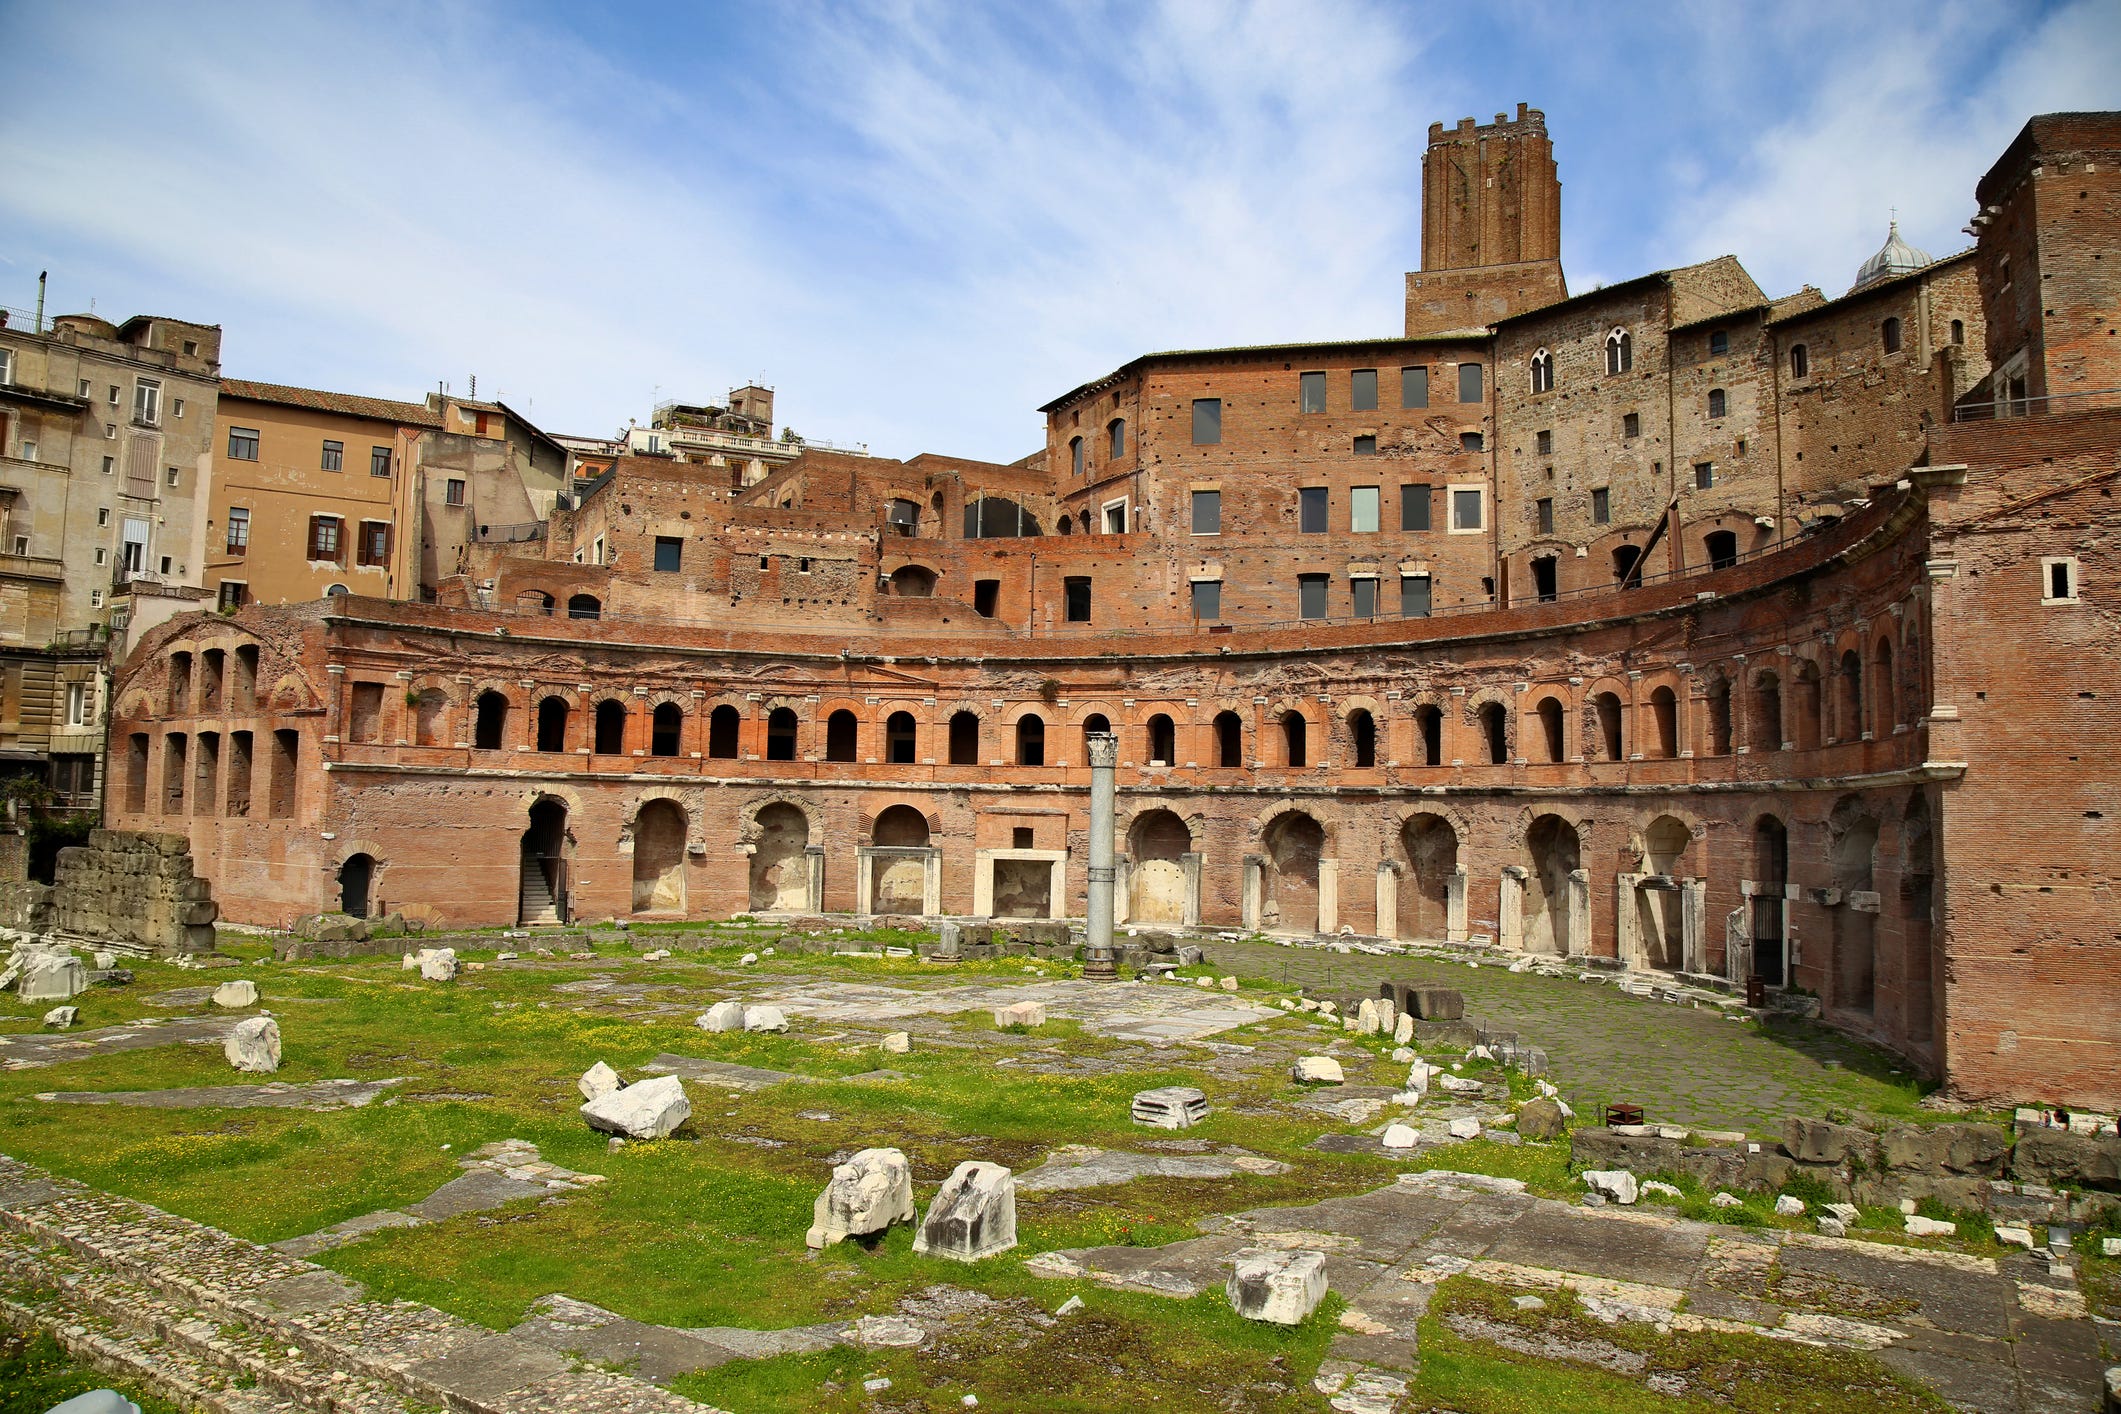 <p><a href="https://www.mercatiditraiano.it/">Trajan's Market</a>, widely considered to be the world's first covered shopping mall, is one of my favorite ancient Roman sites in the city because of its history and well-preserved state.</p><p>It sits squarely along the Via dei Fori Imperiali, a long road stretching from the Colosseum to Piazza Venezia.</p><p><a href="https://www.atlasobscura.com/places/mercatus-traiani-trajans-market">Built by Emperor Trajan</a> around 105 CE, the multi-level structure once housed a library, offices, and shops.</p><p>The remains of wall frescoes and geometric floor mosaics can still be seen in the ground-floor stalls. At the top of the structure is, in my opinion, one of the most beautiful panoramic views of Rome.</p>